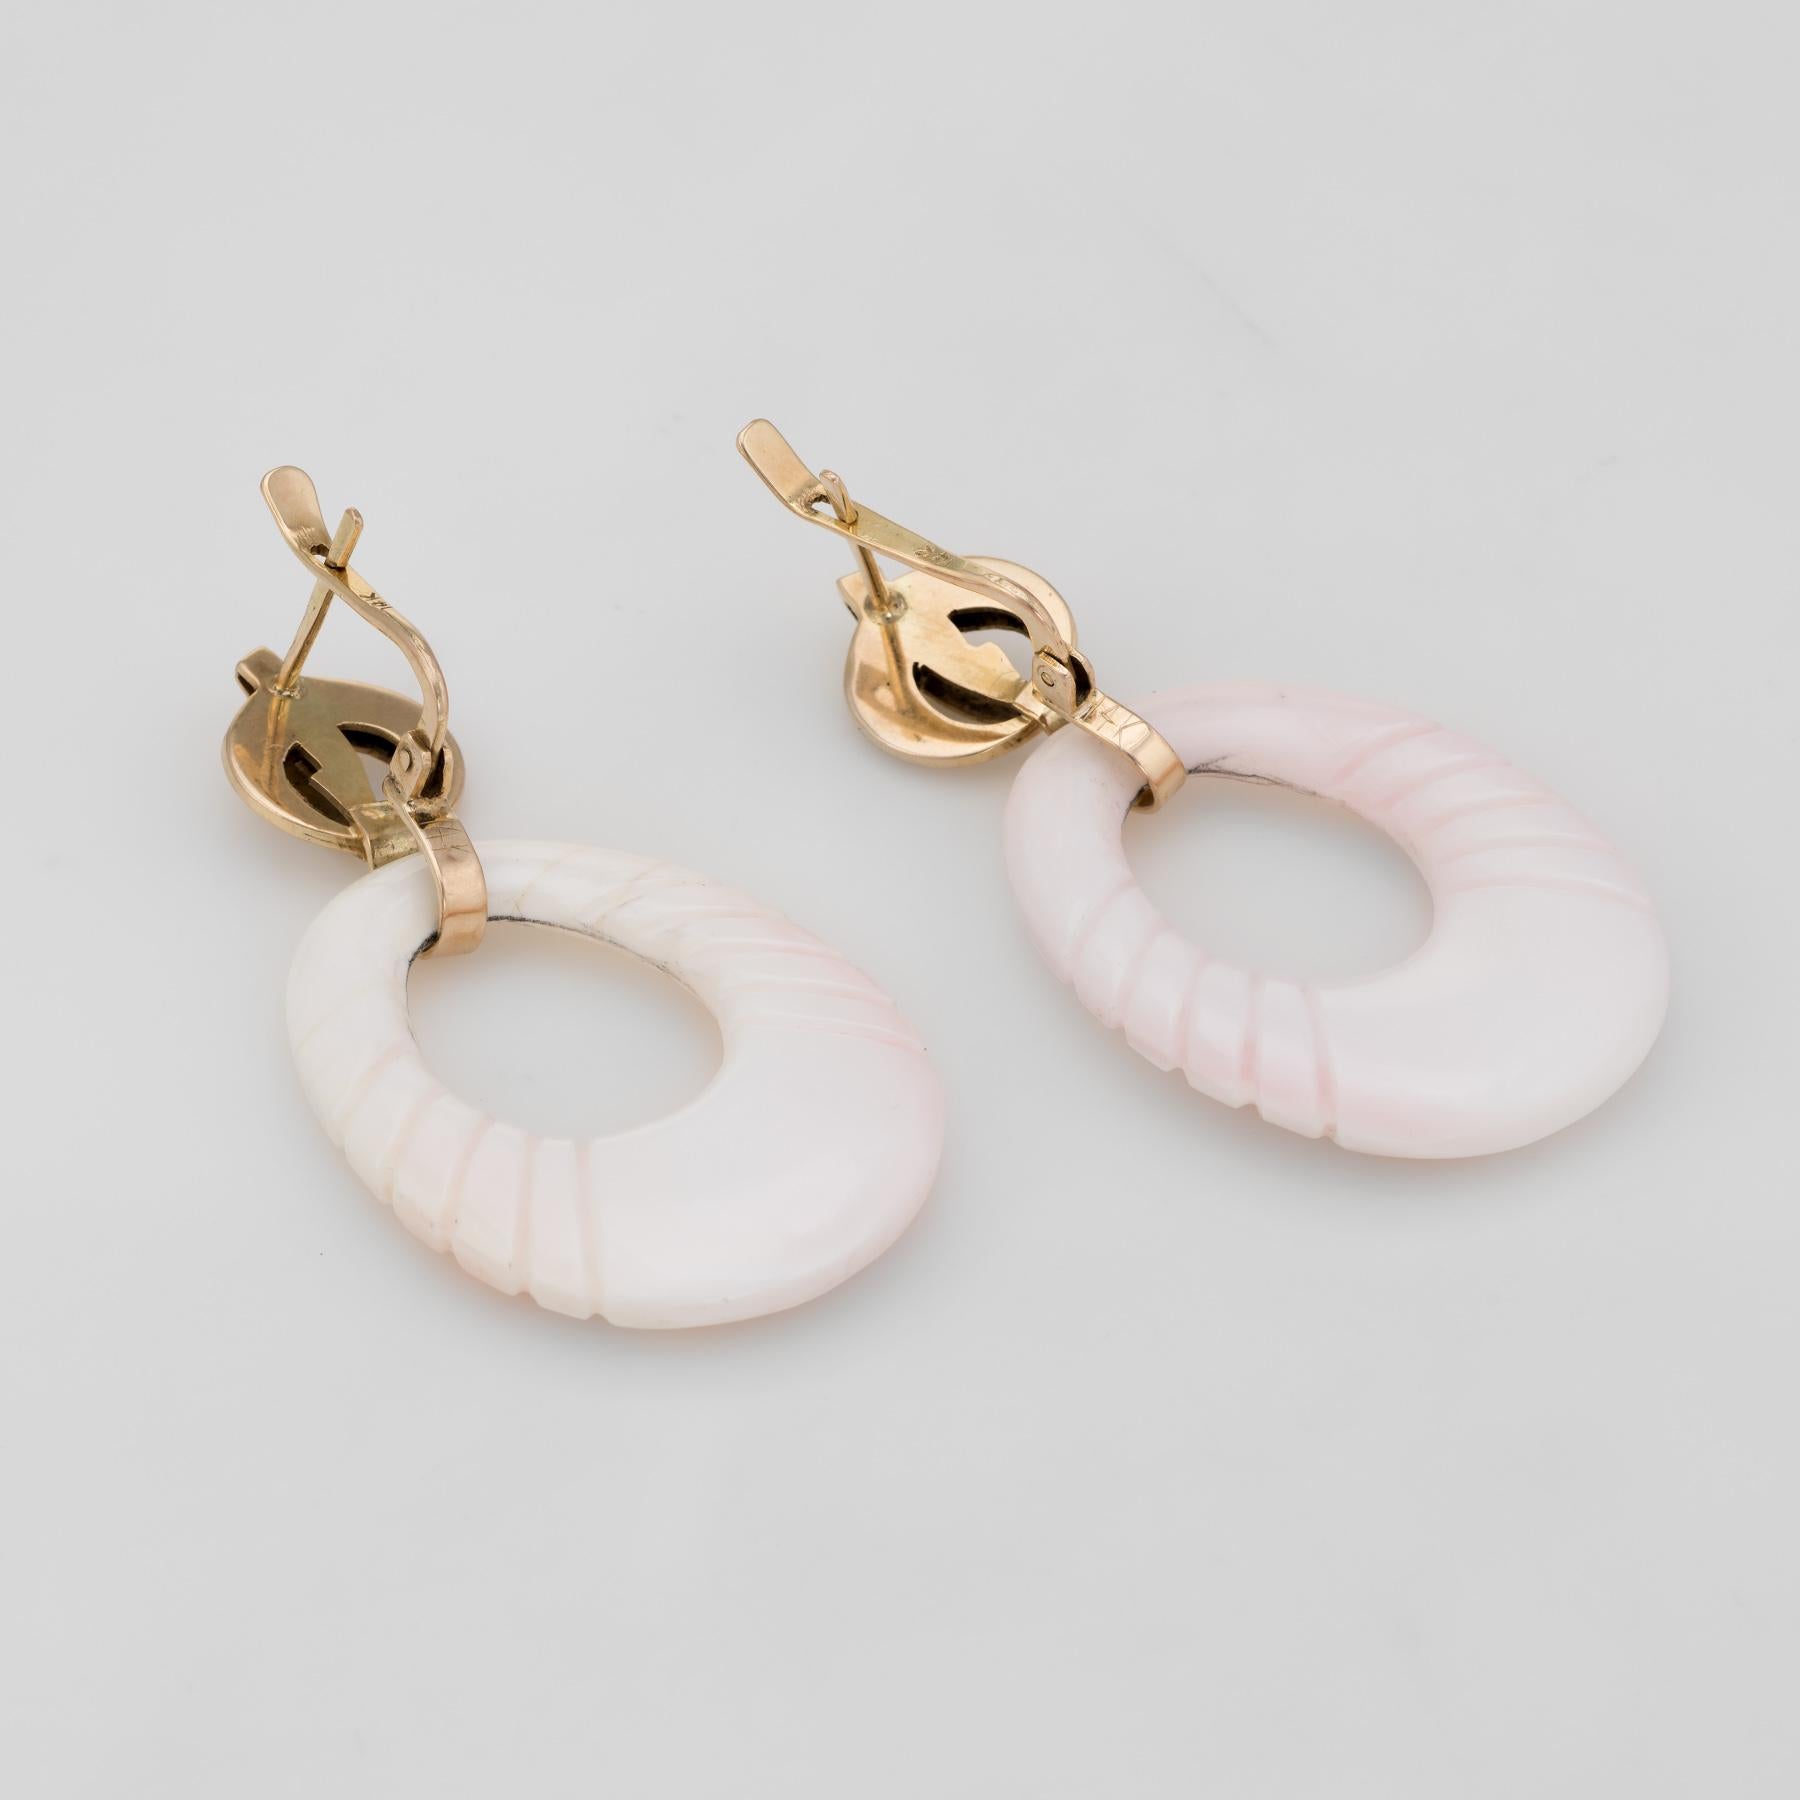 Finely detailed pair of vintage angel skin coral earrings (circa 1960s), crafted in 14k yellow gold. 

Two pieces of angel skin coral measure 38mm x 27mm. The coral features a graduated ridged design on both sides of the coral.   

The earrings make